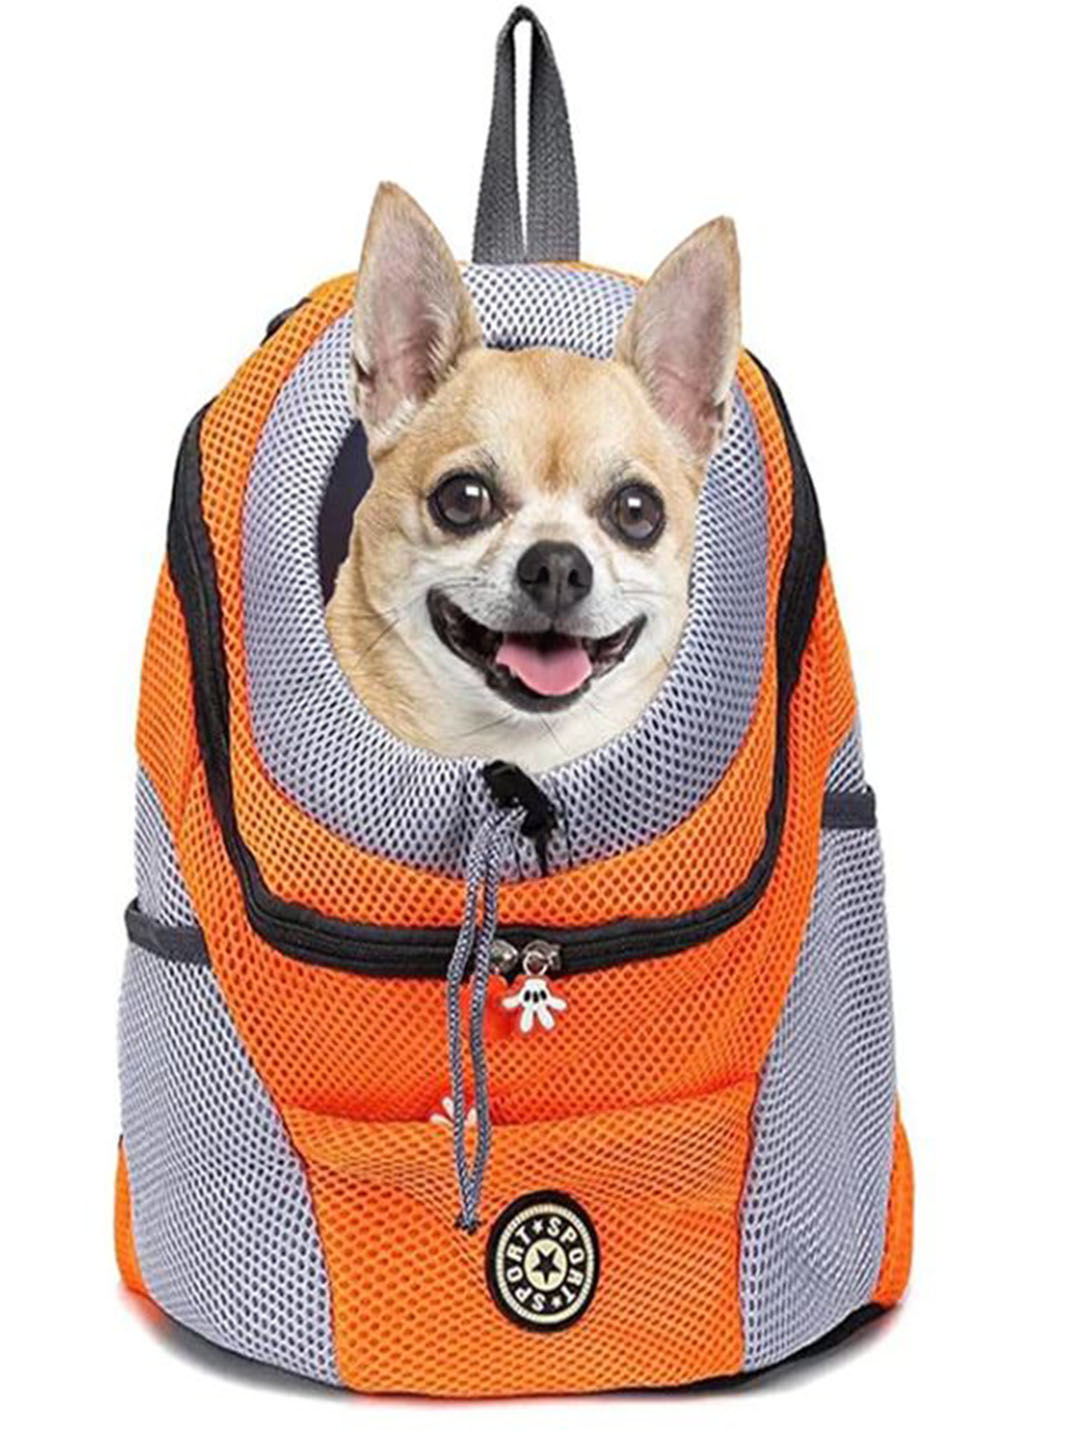 Puppy wearing nice and soft harness vest